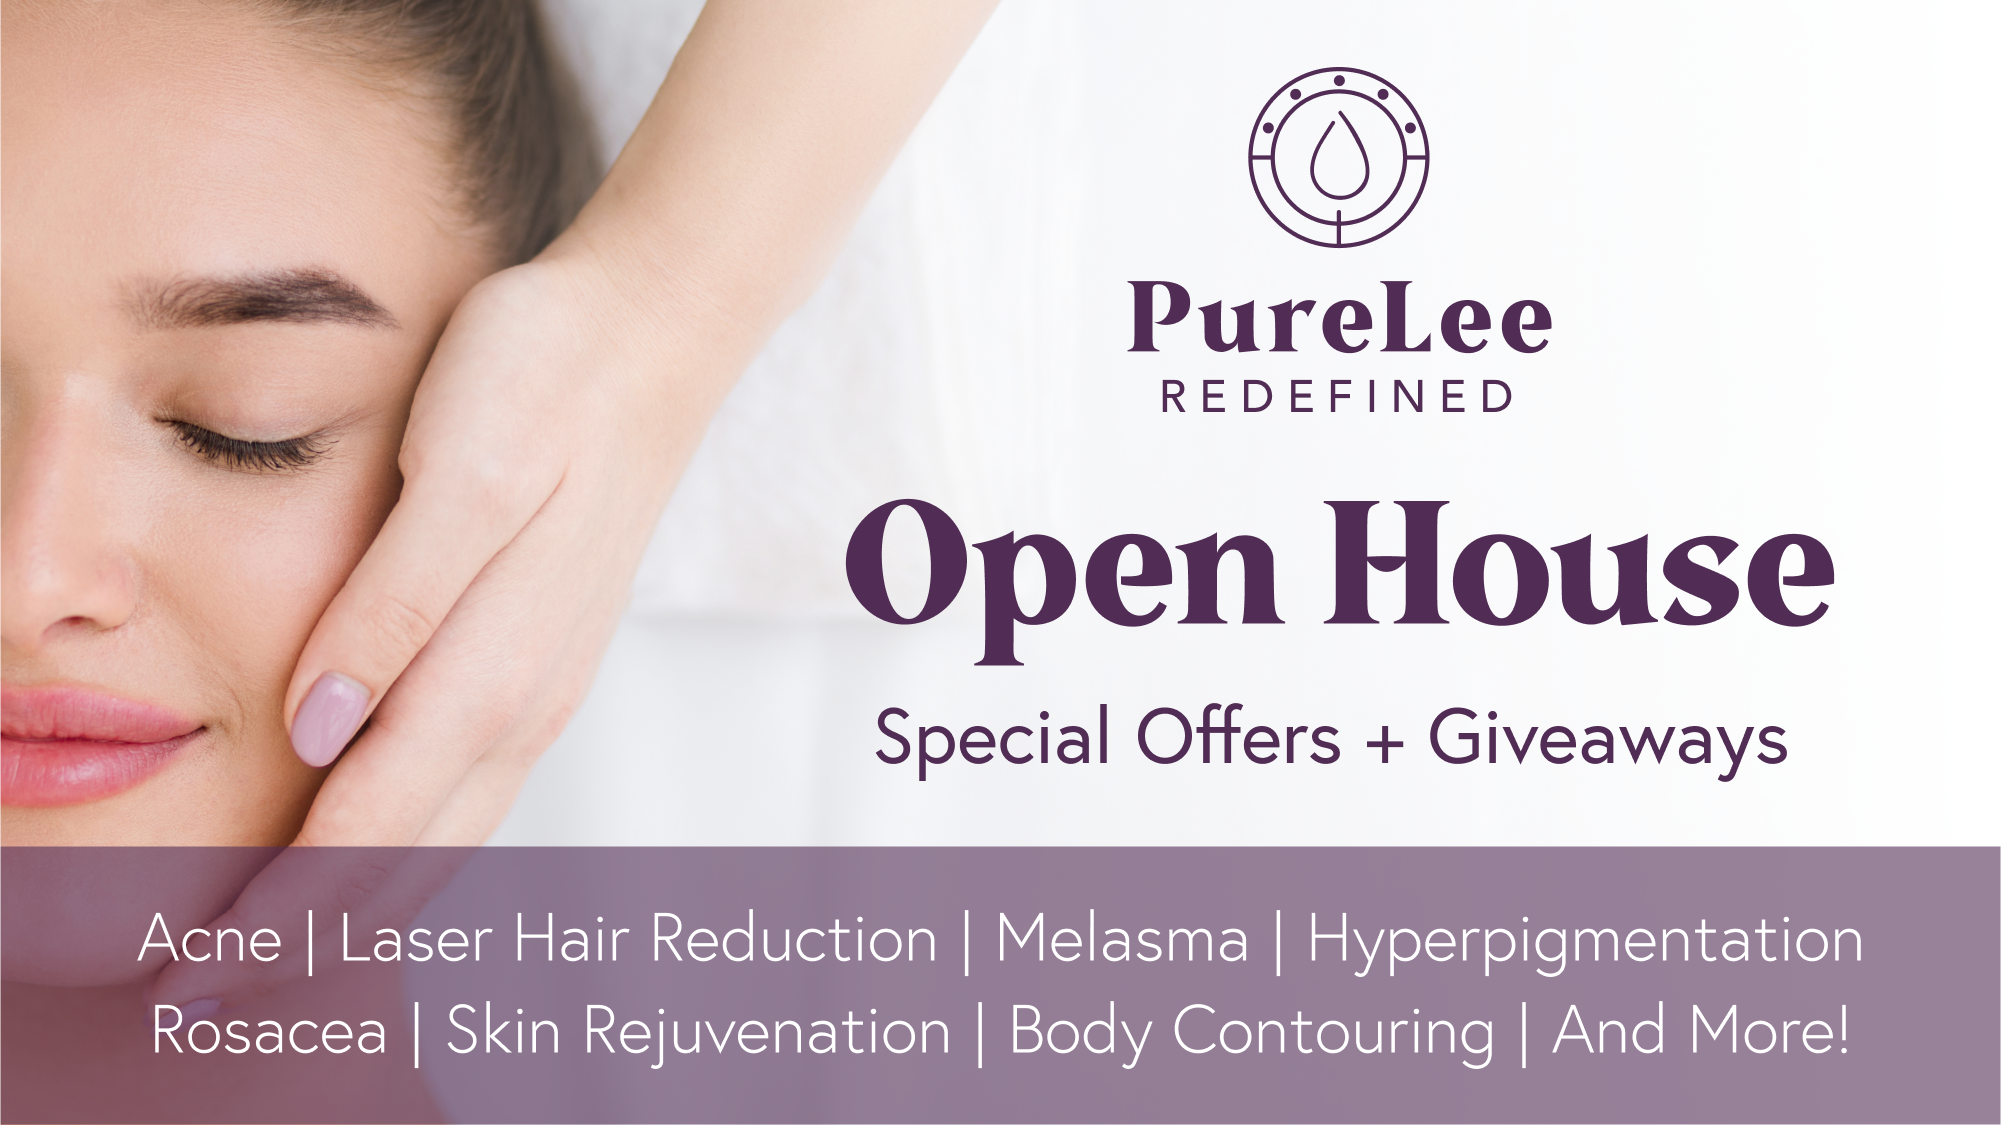 PureLee Open House Event with special offers on medspa packages and skincare